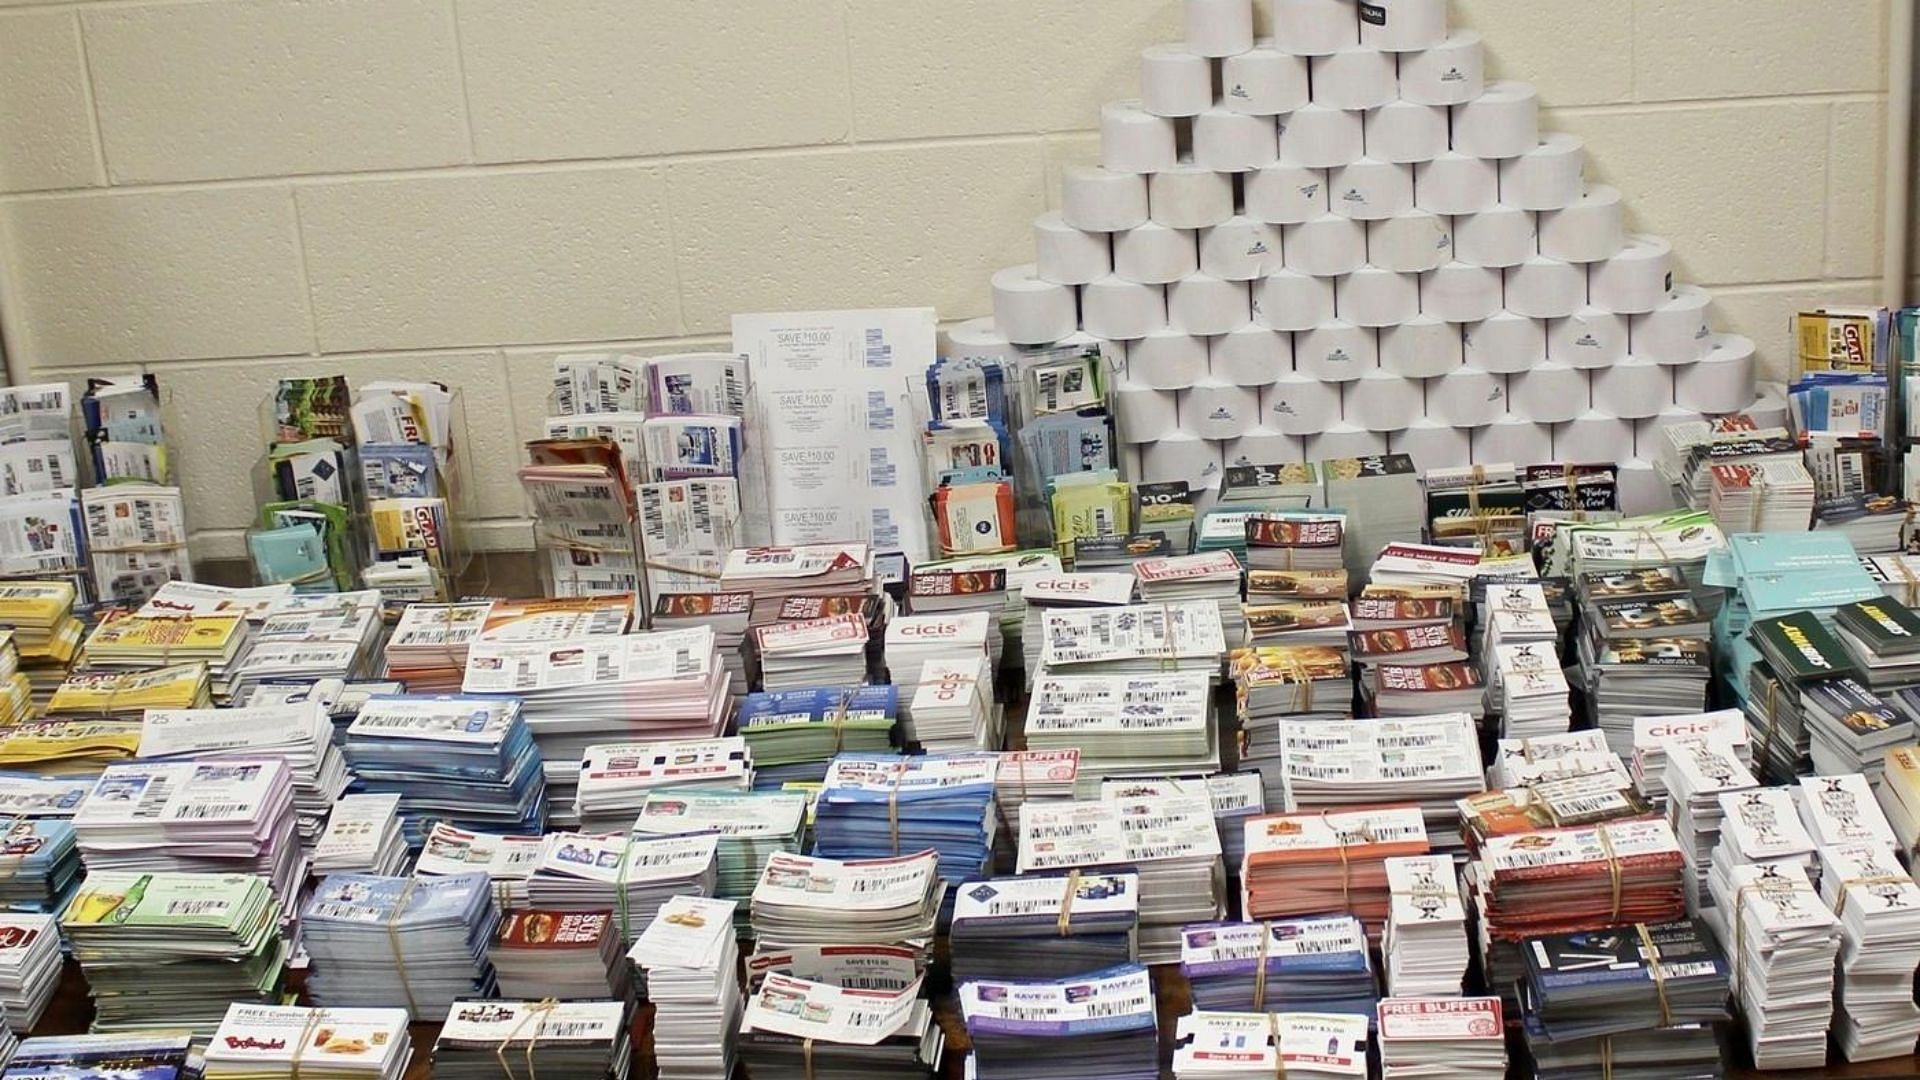 During the investigation, authorities seized nearly $1 million worth of fake coupons from Talens'.  residence (image via WRIC/Google)